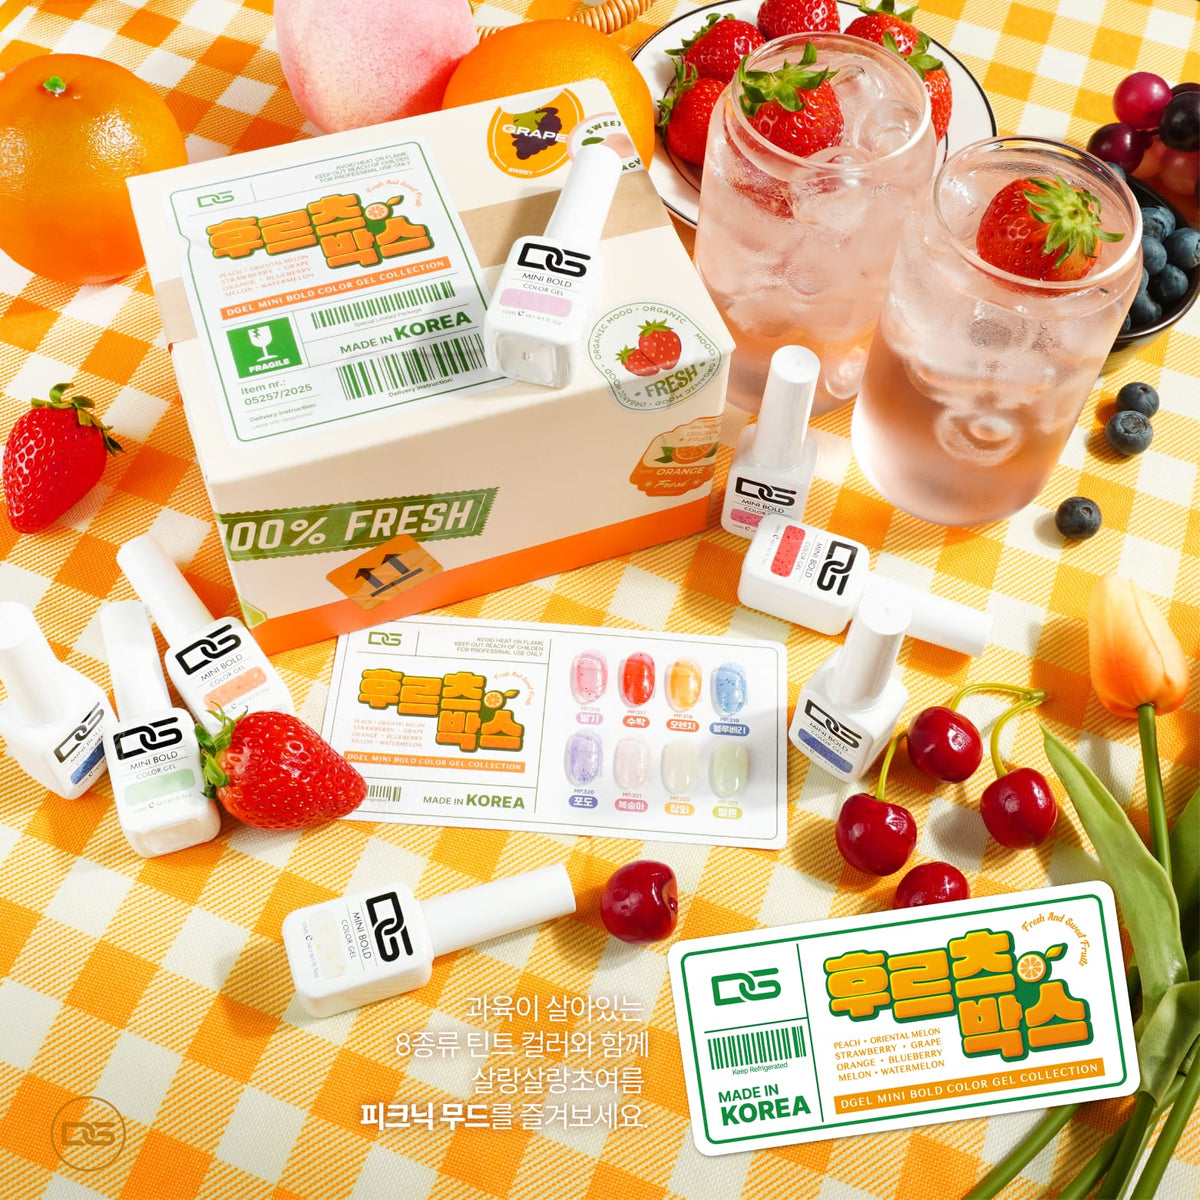 DGEL MINIBOLD Fruits Box Collection